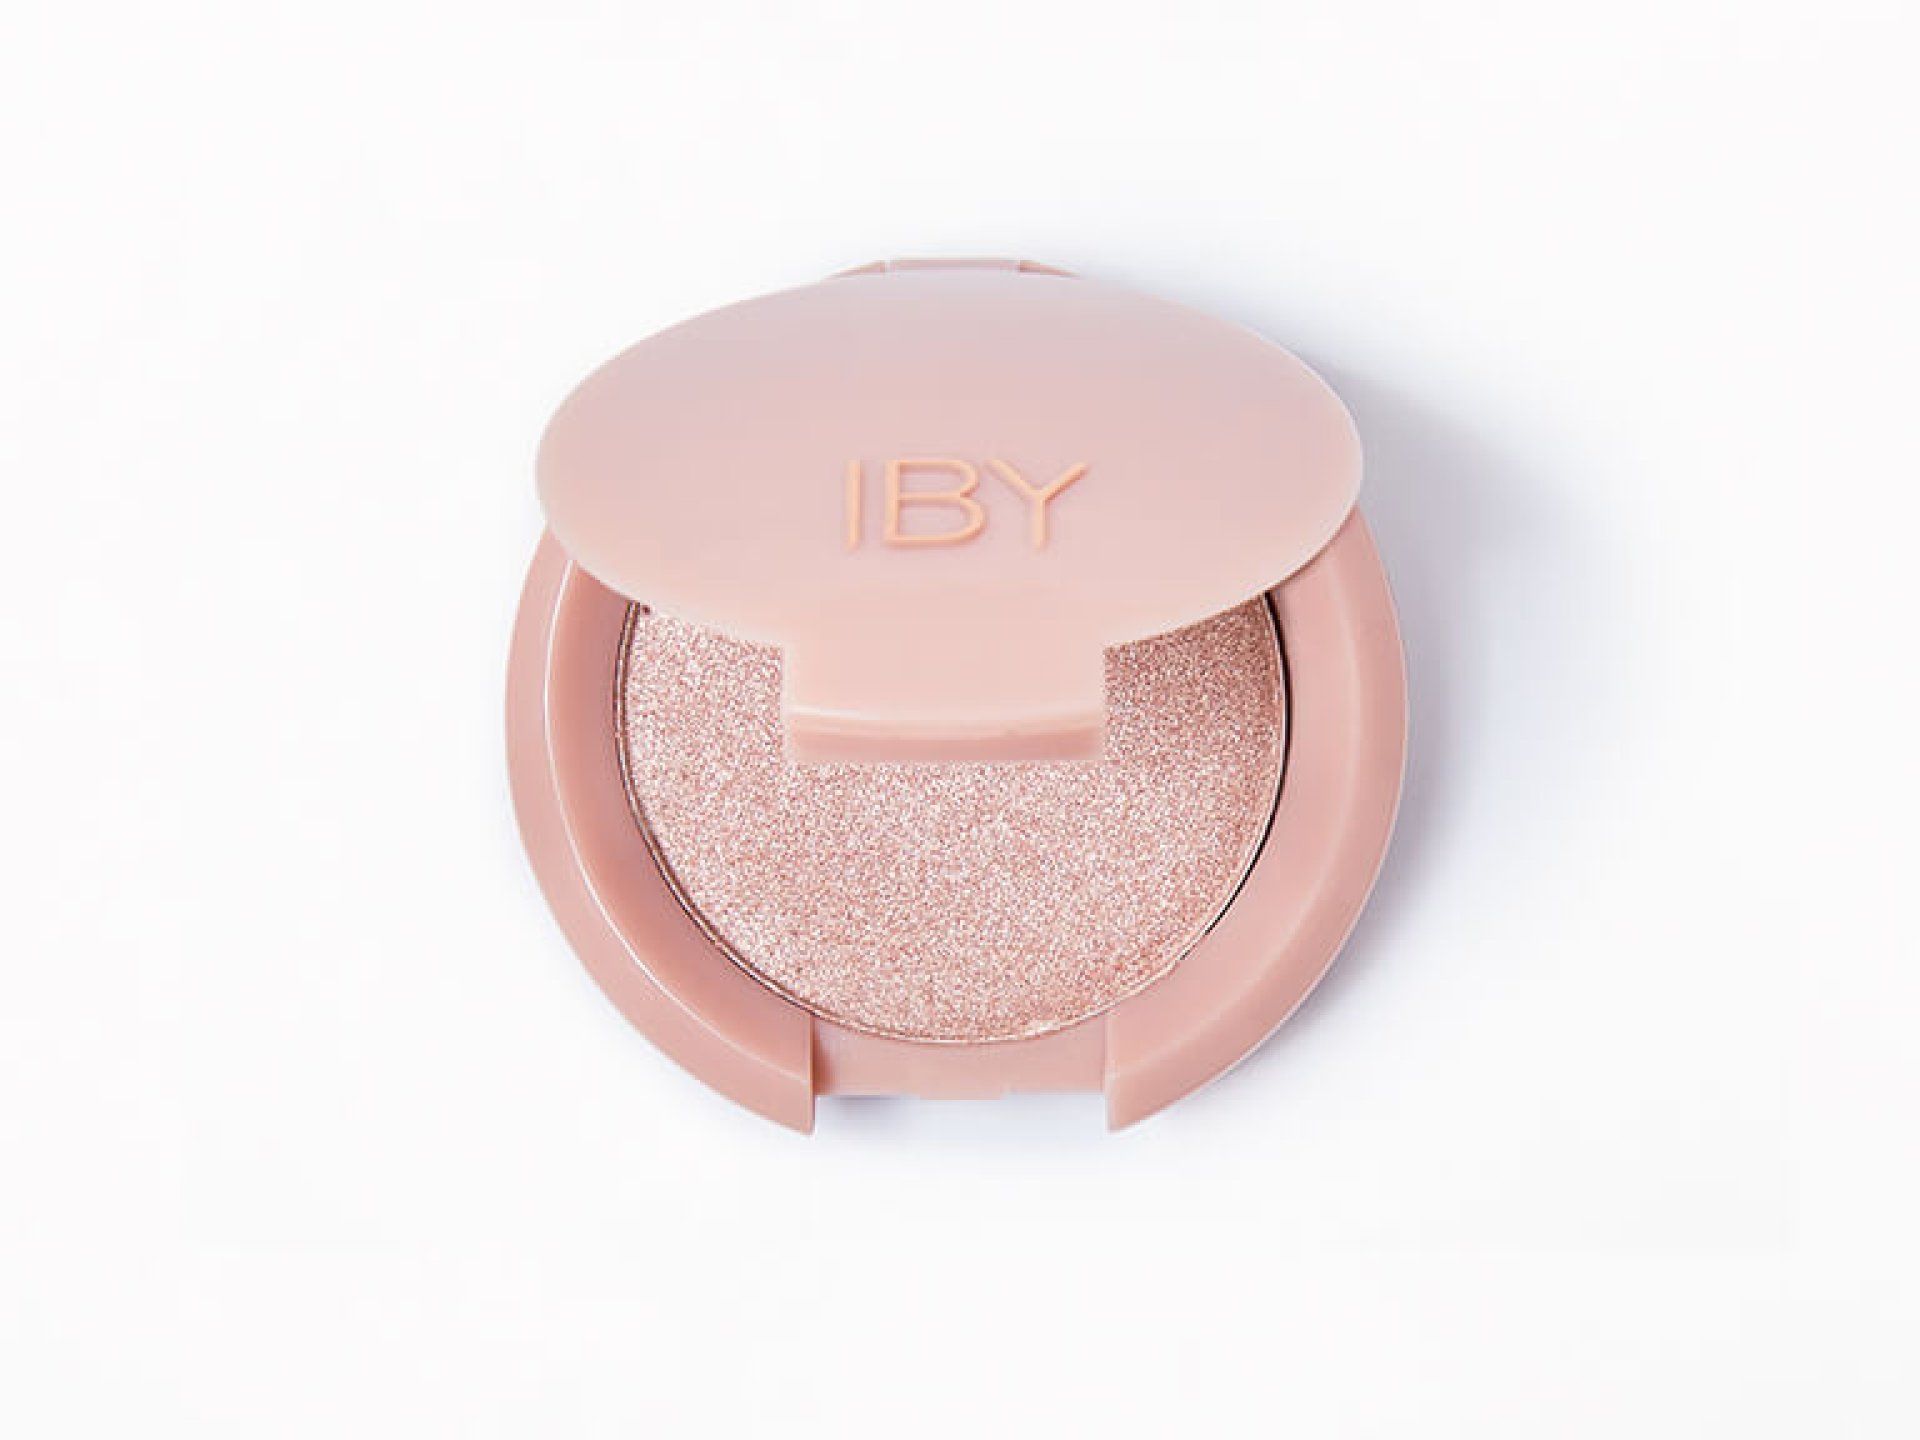 IBY BEAUTY Carry On 2 Face Palette in Wanderlust